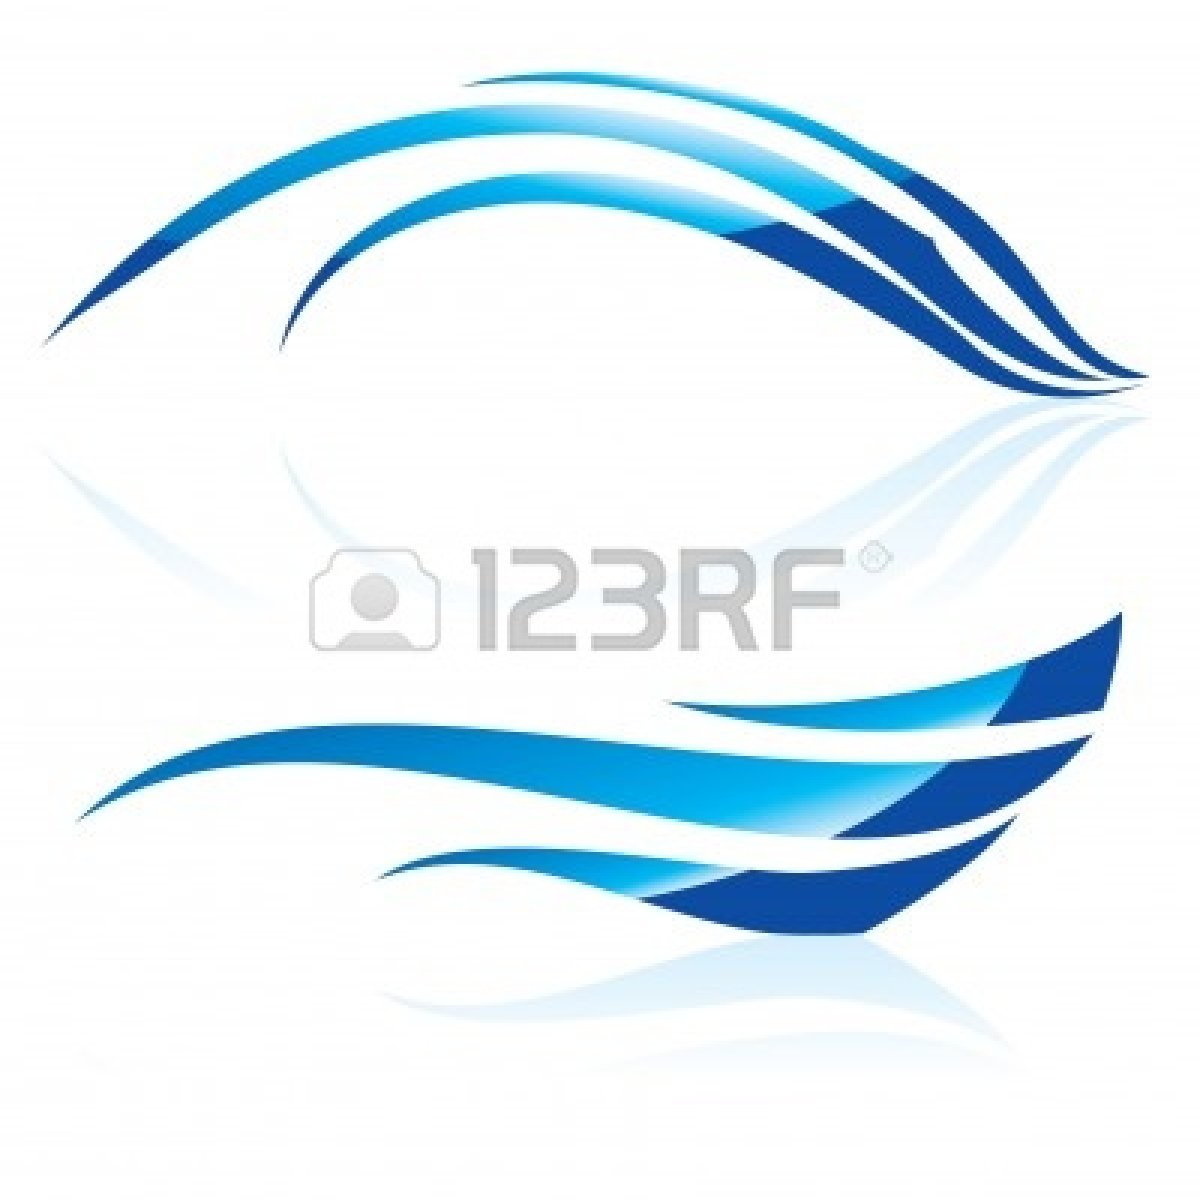 Flowing Water Vector   Clipart Panda   Free Clipart Images